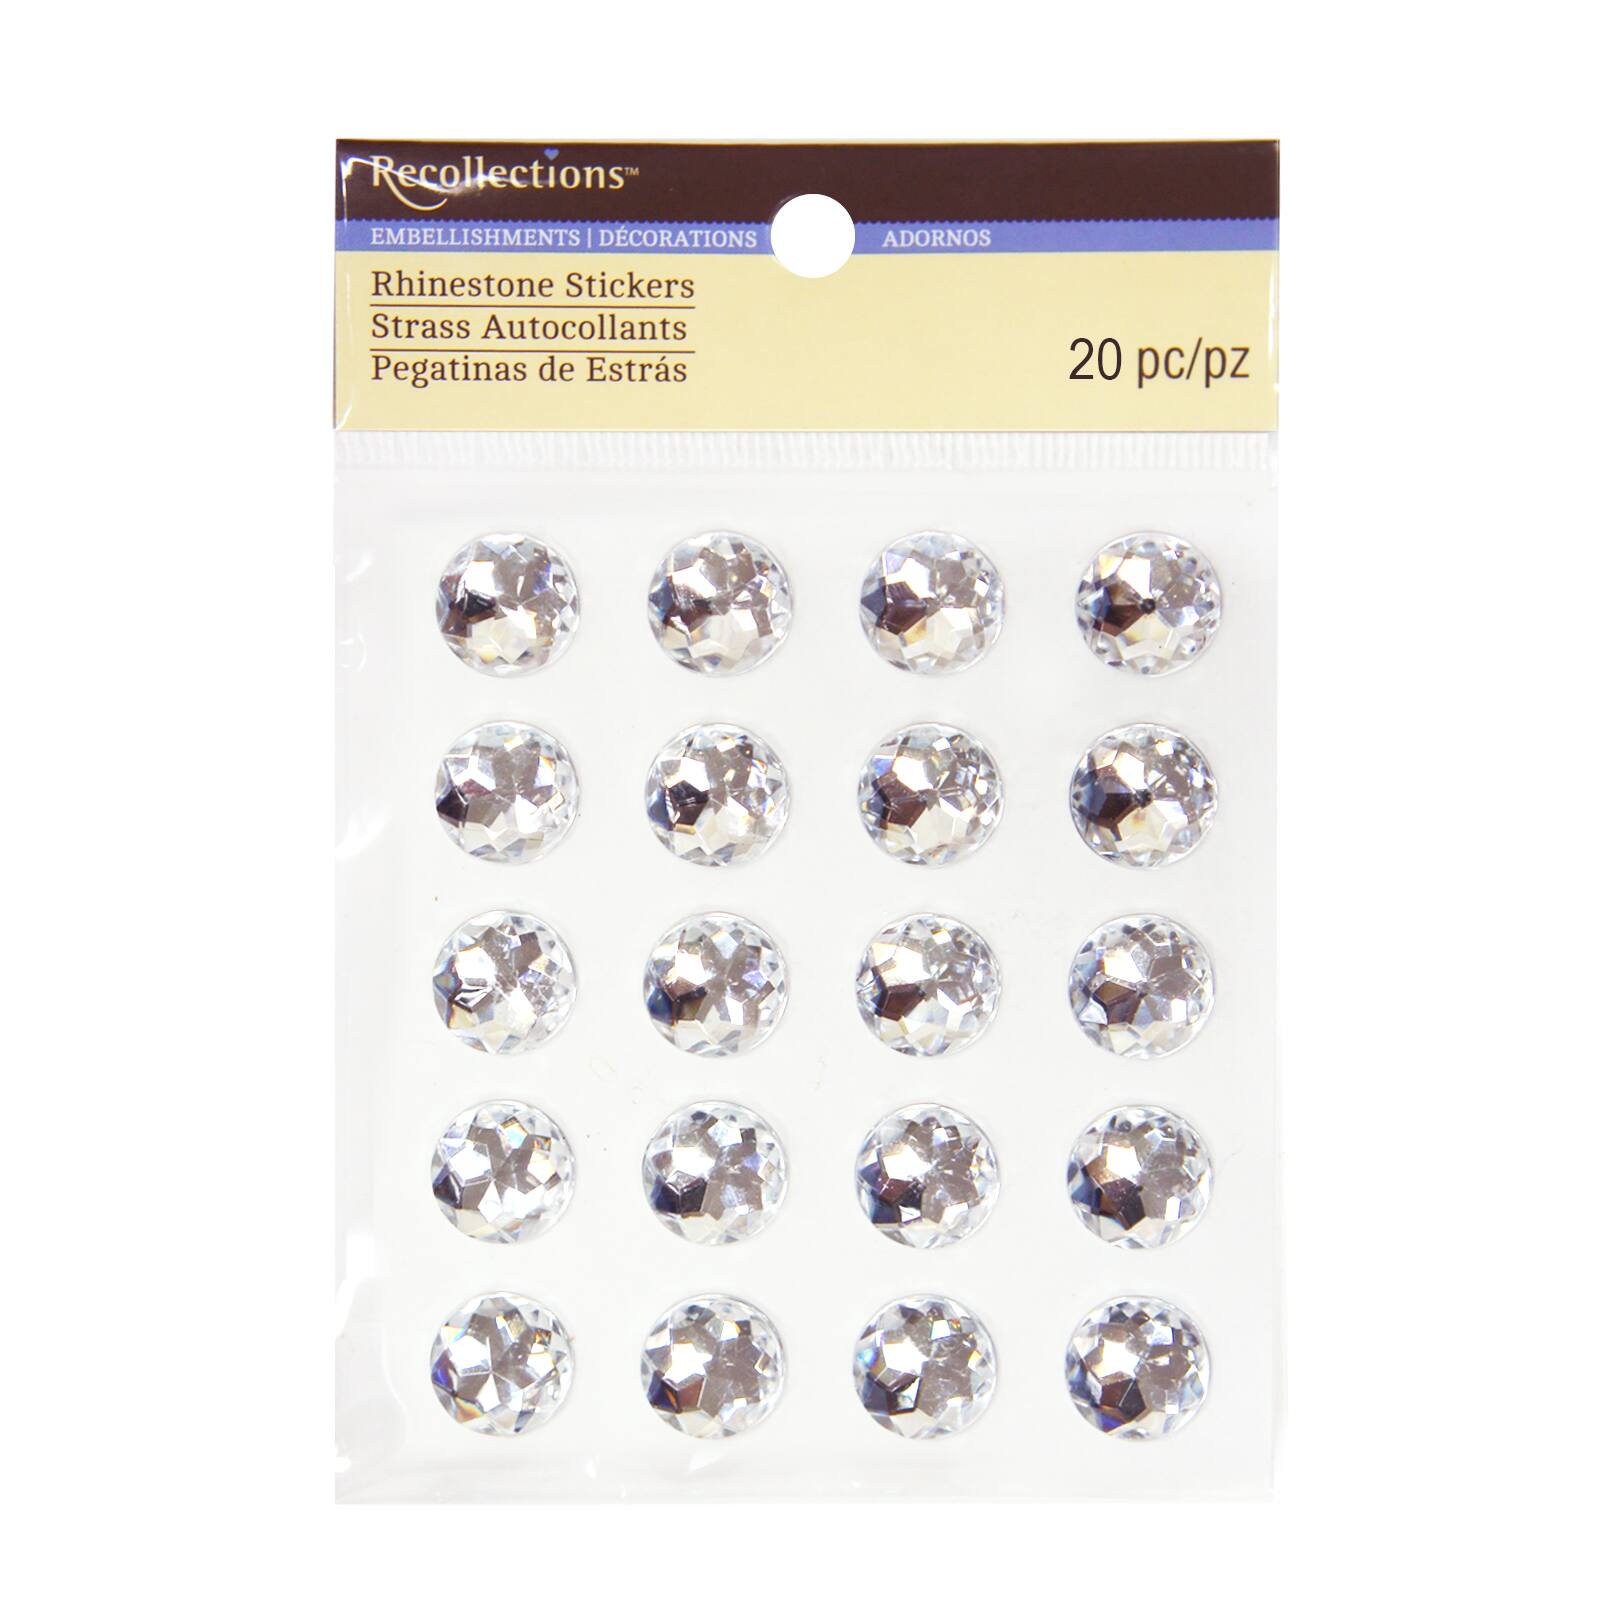 Buy the Clear Rhinestone Stickers by Recollections™ at Michaels